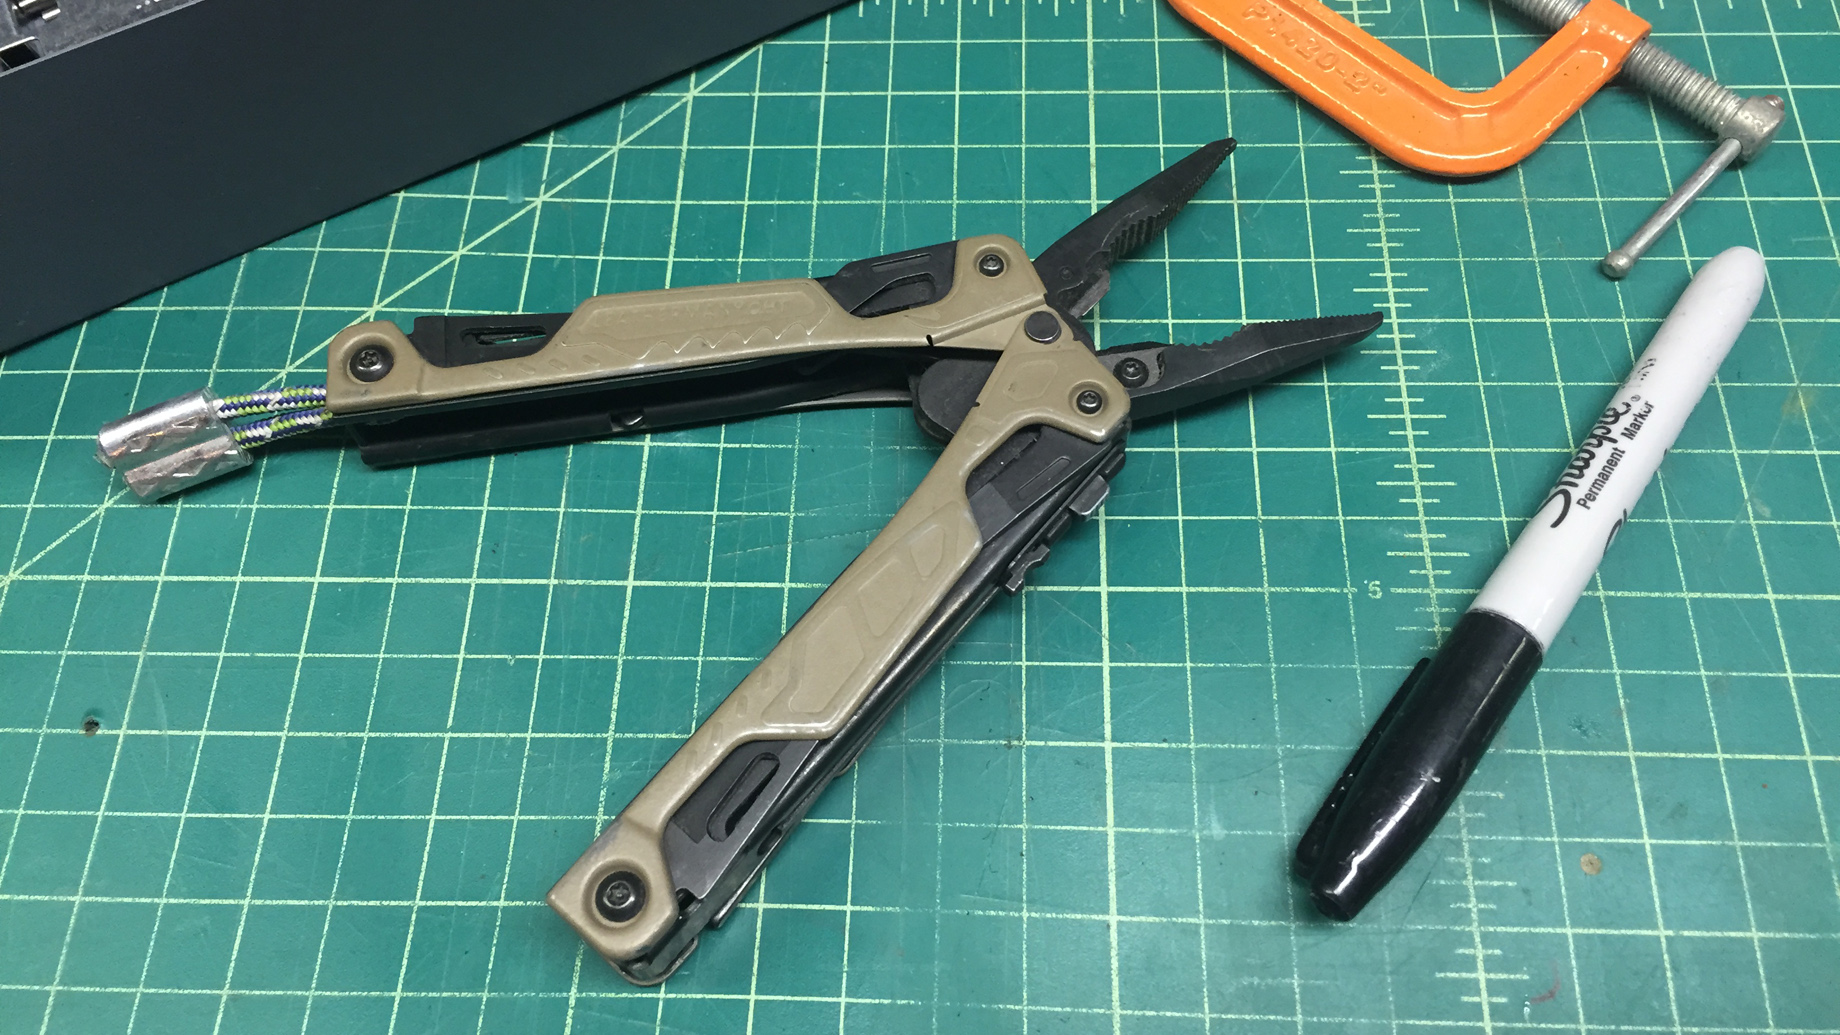 Leatherman Signal Review - Beyond the Edge